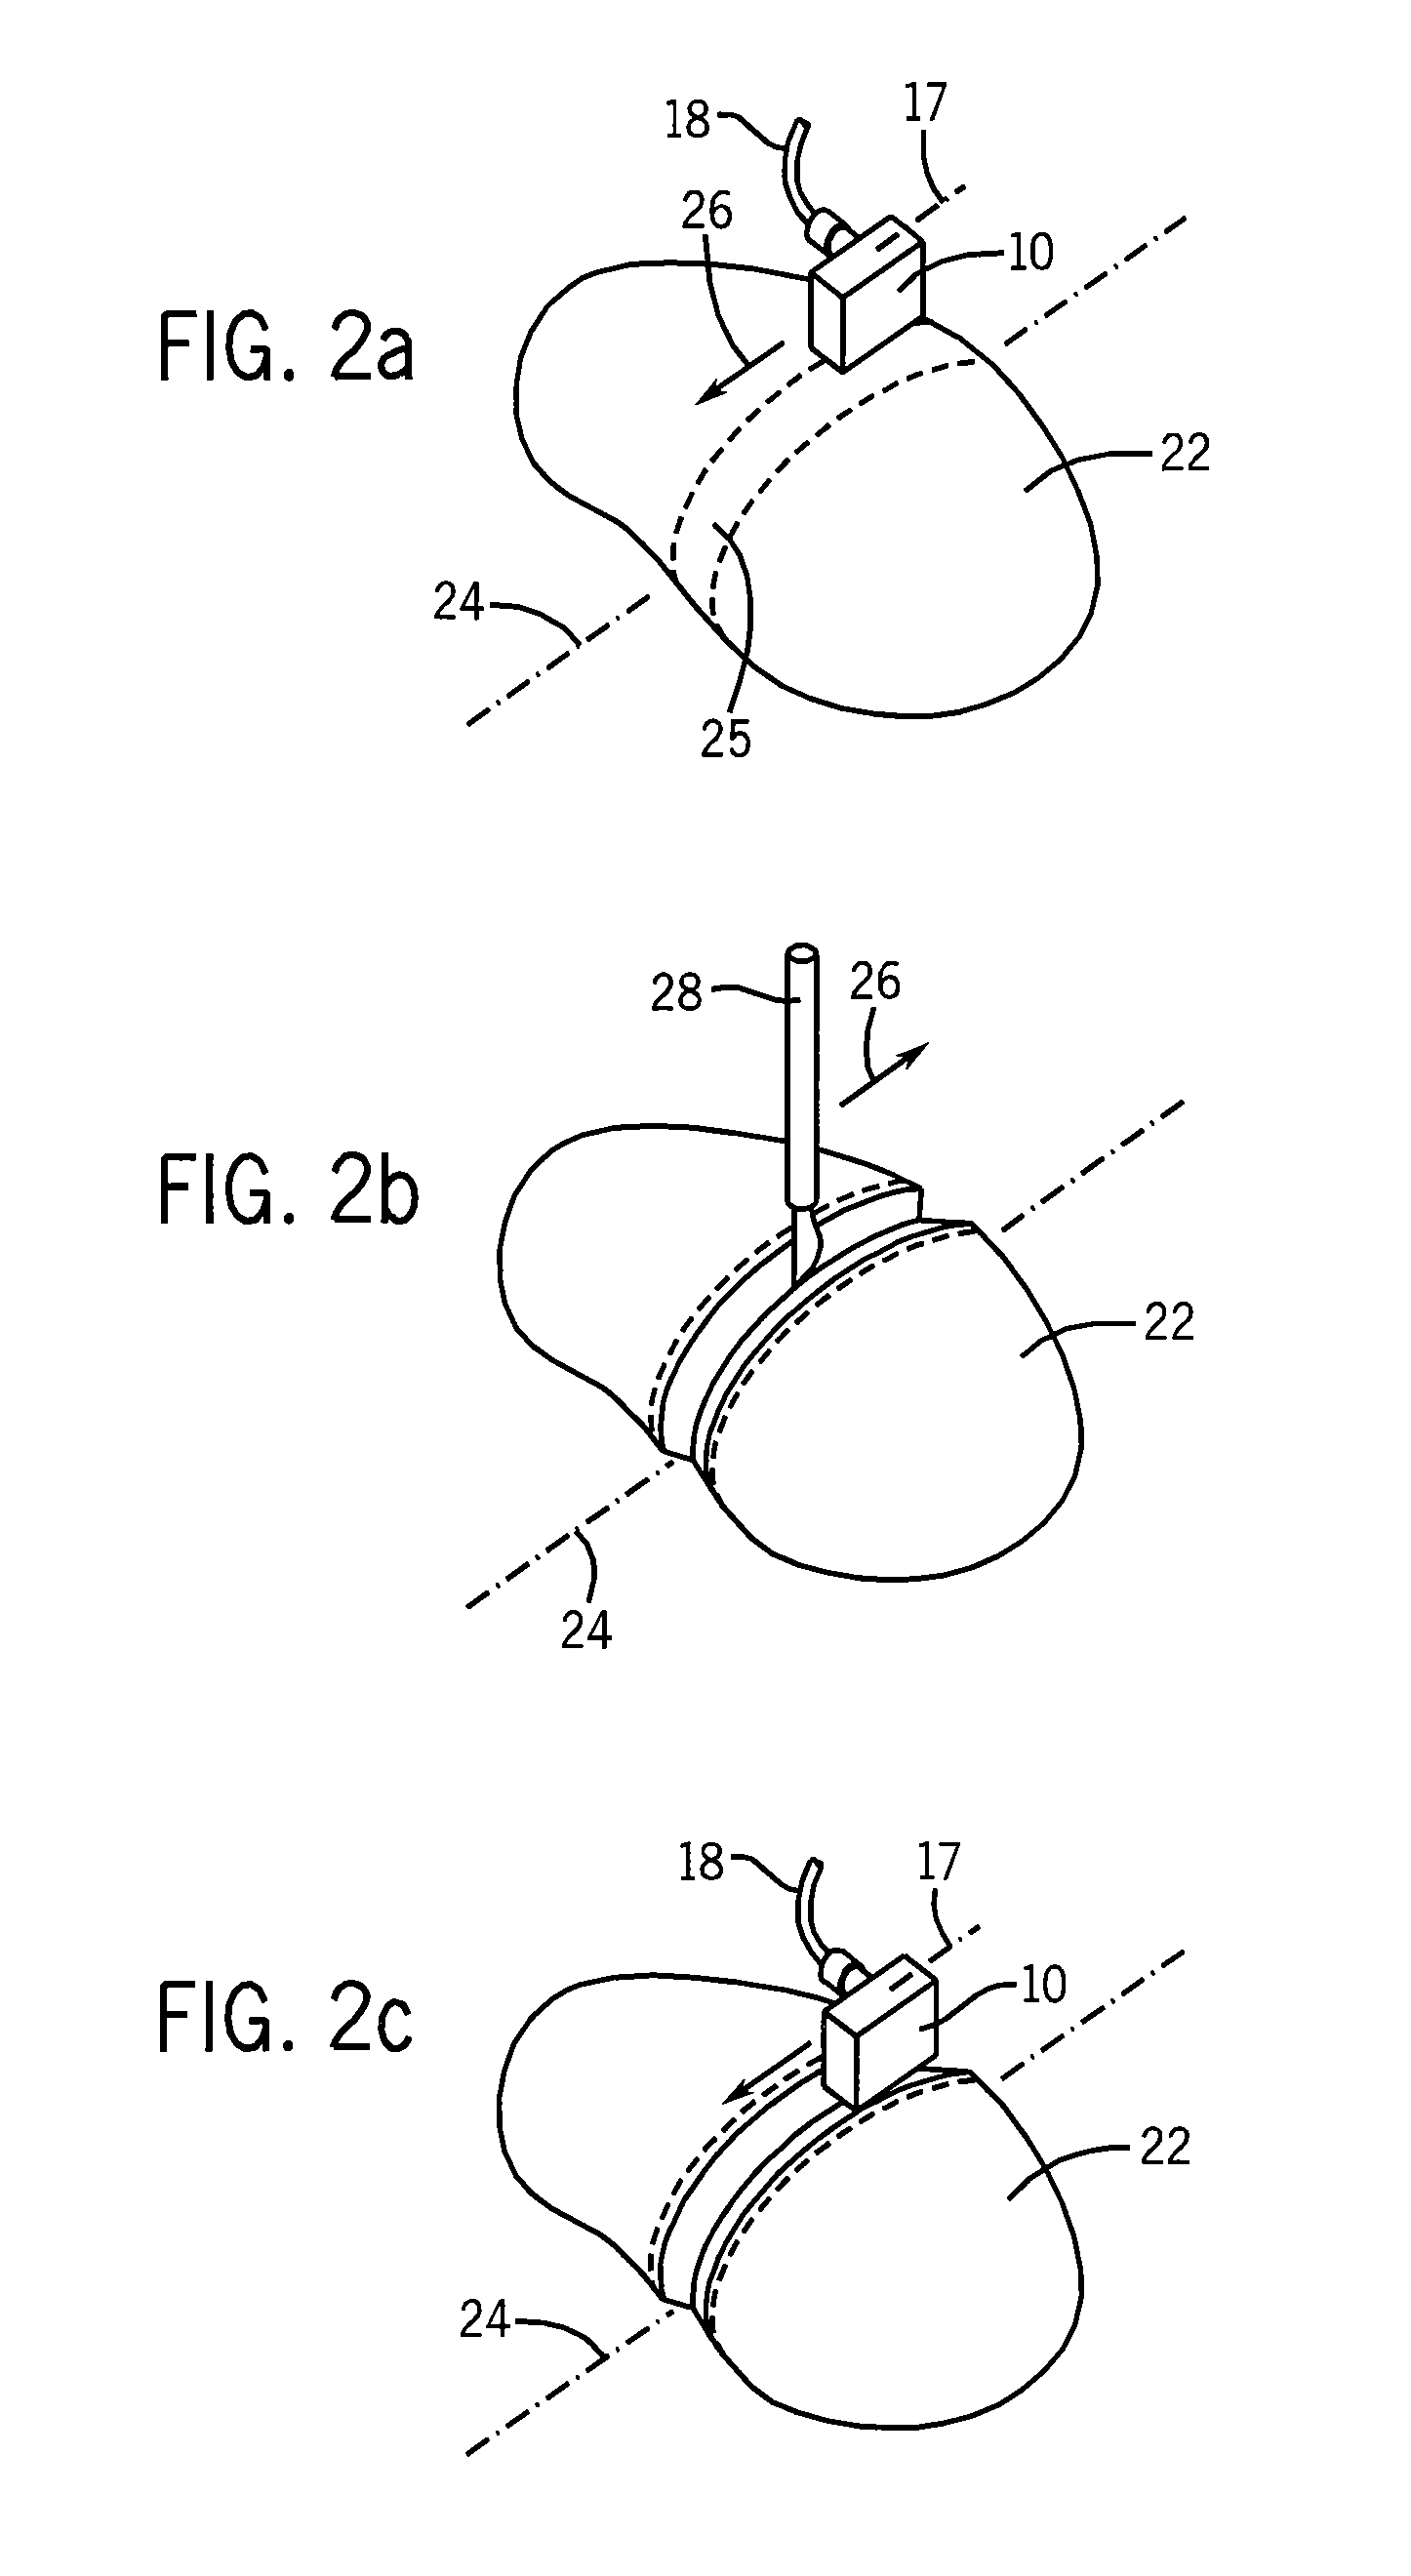 Fan-beam microwave horn for bloodless resection